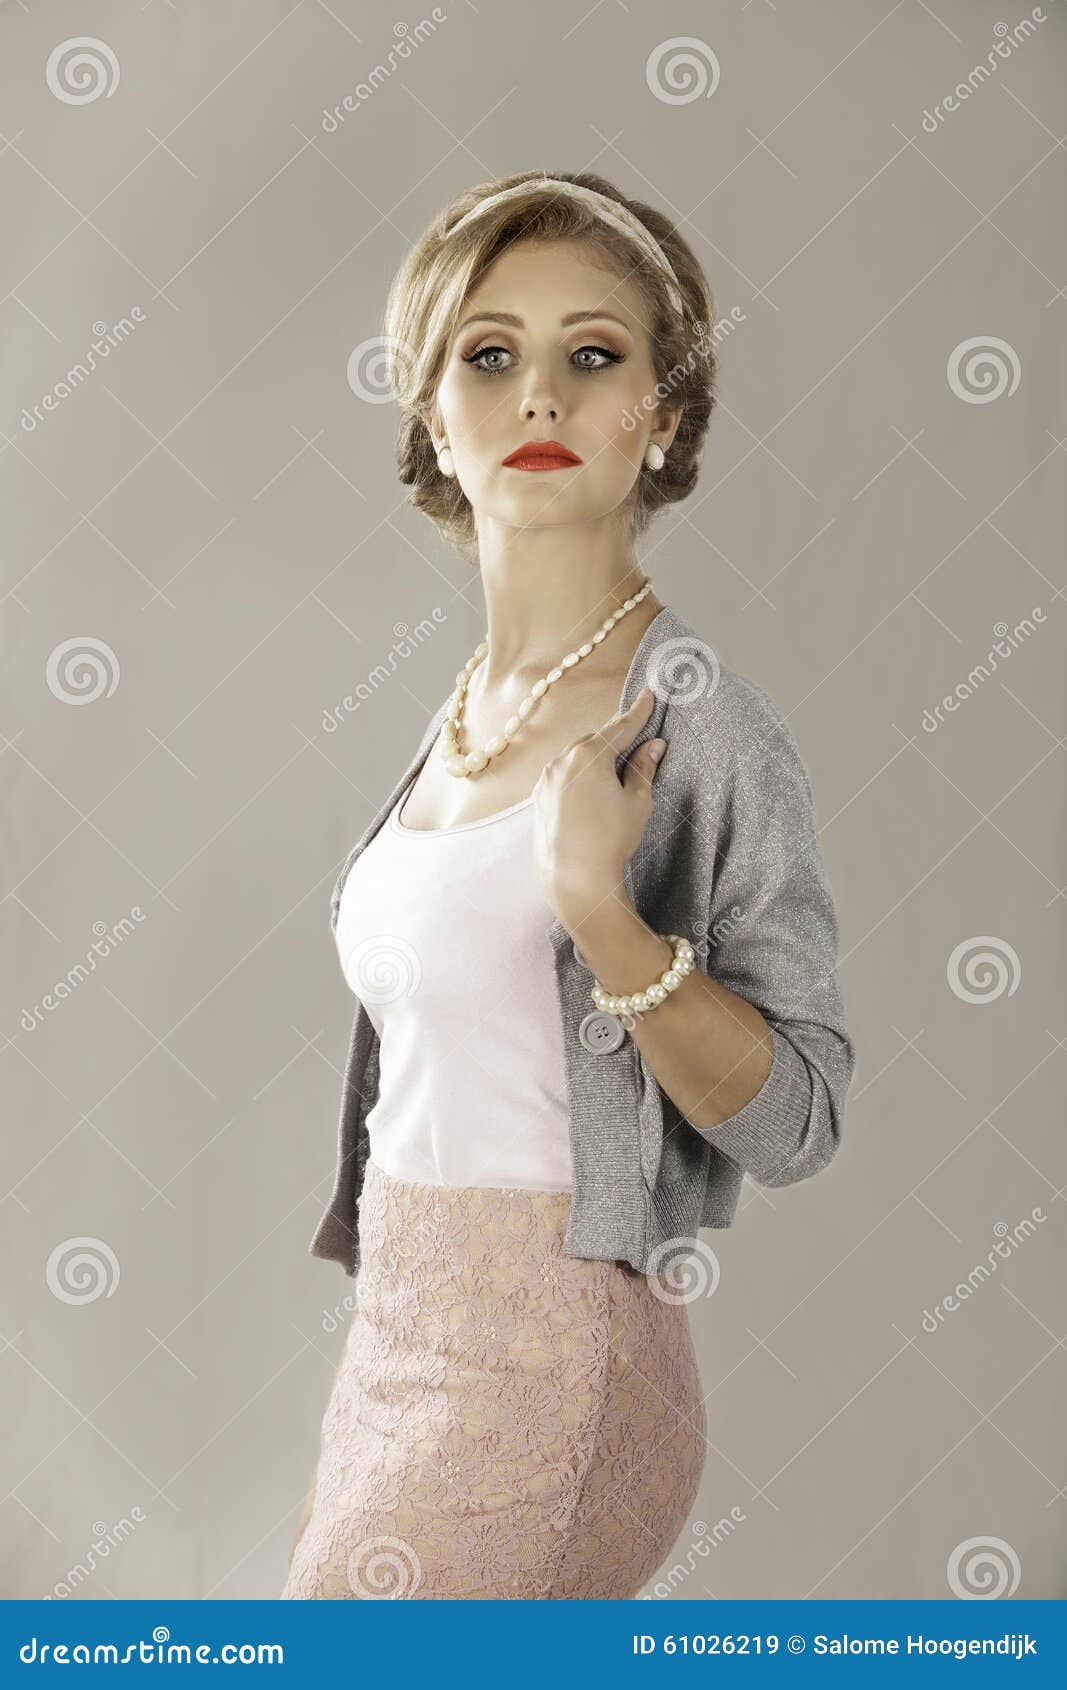 1950s Woman In Twinset And Pearls Stock Image Image Of Cardigan